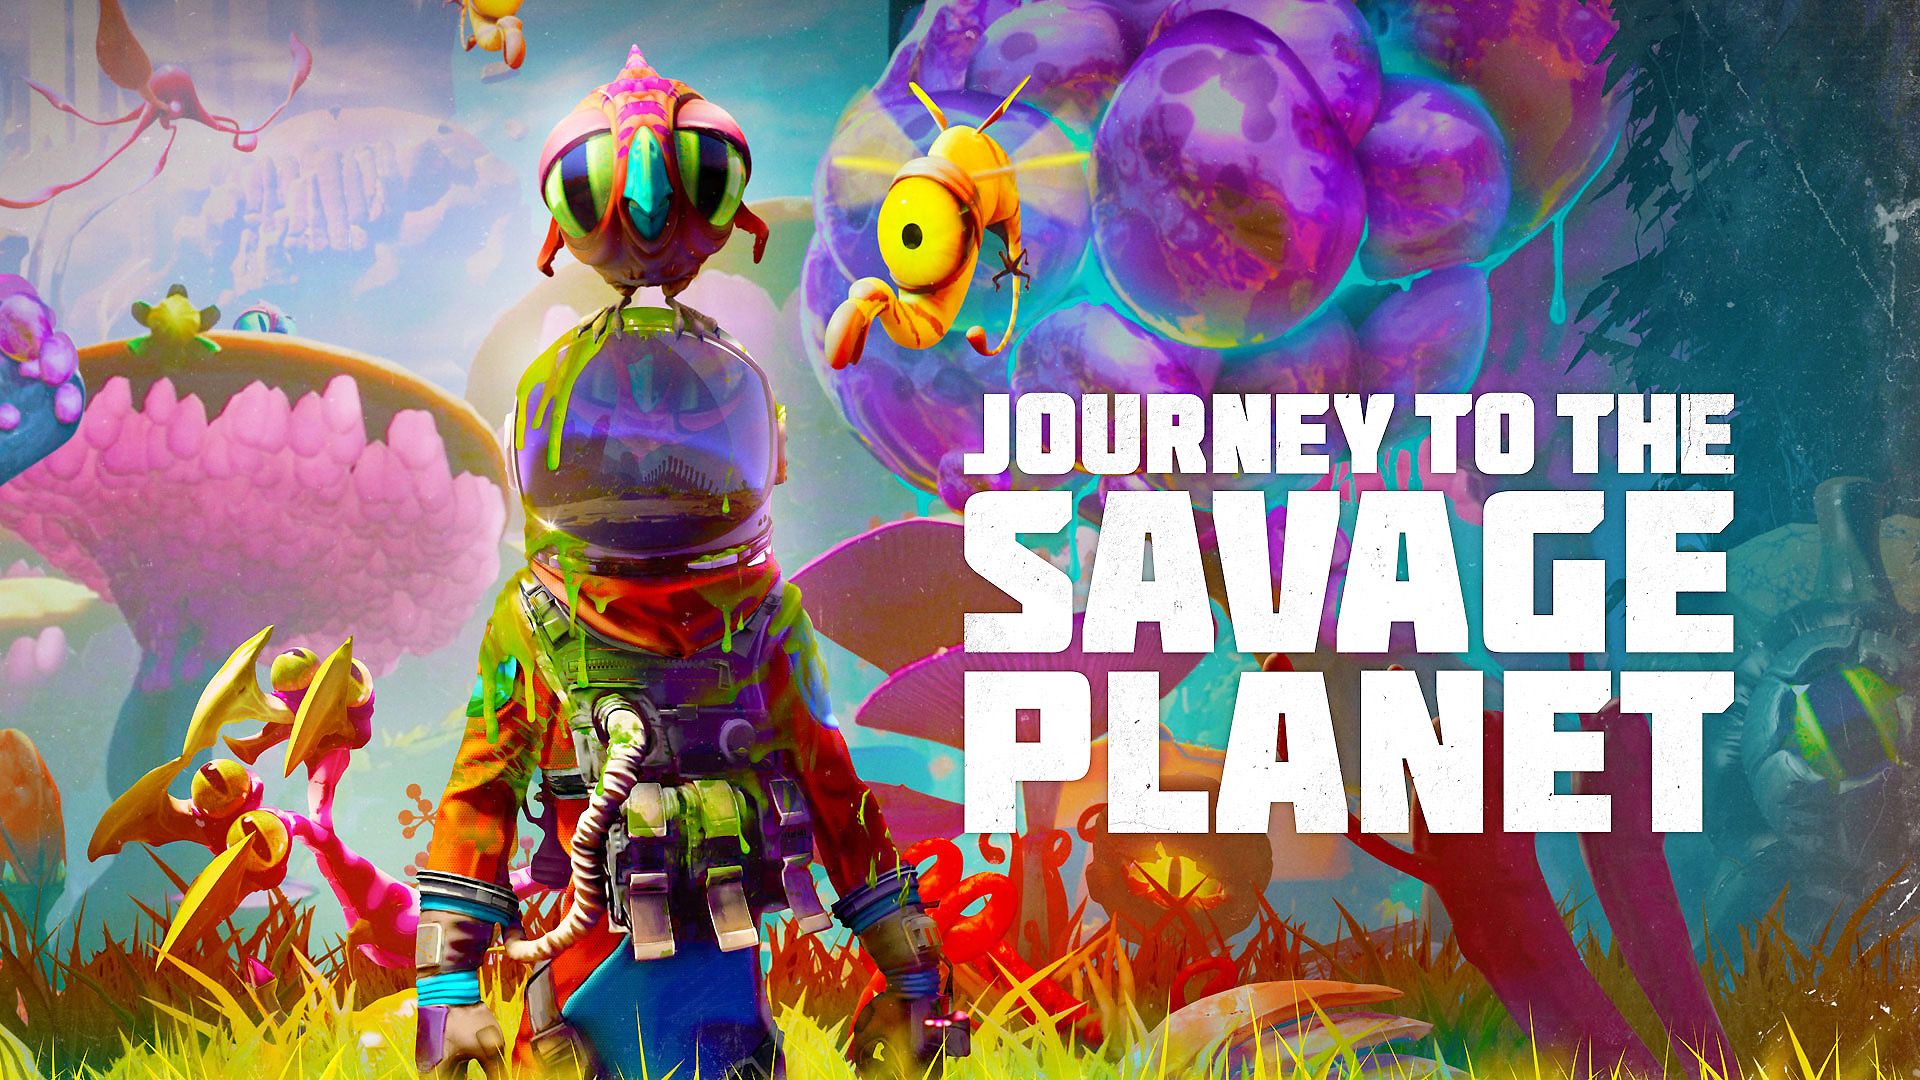 Journey to the Savage Planet and Item-Based Progression Systems